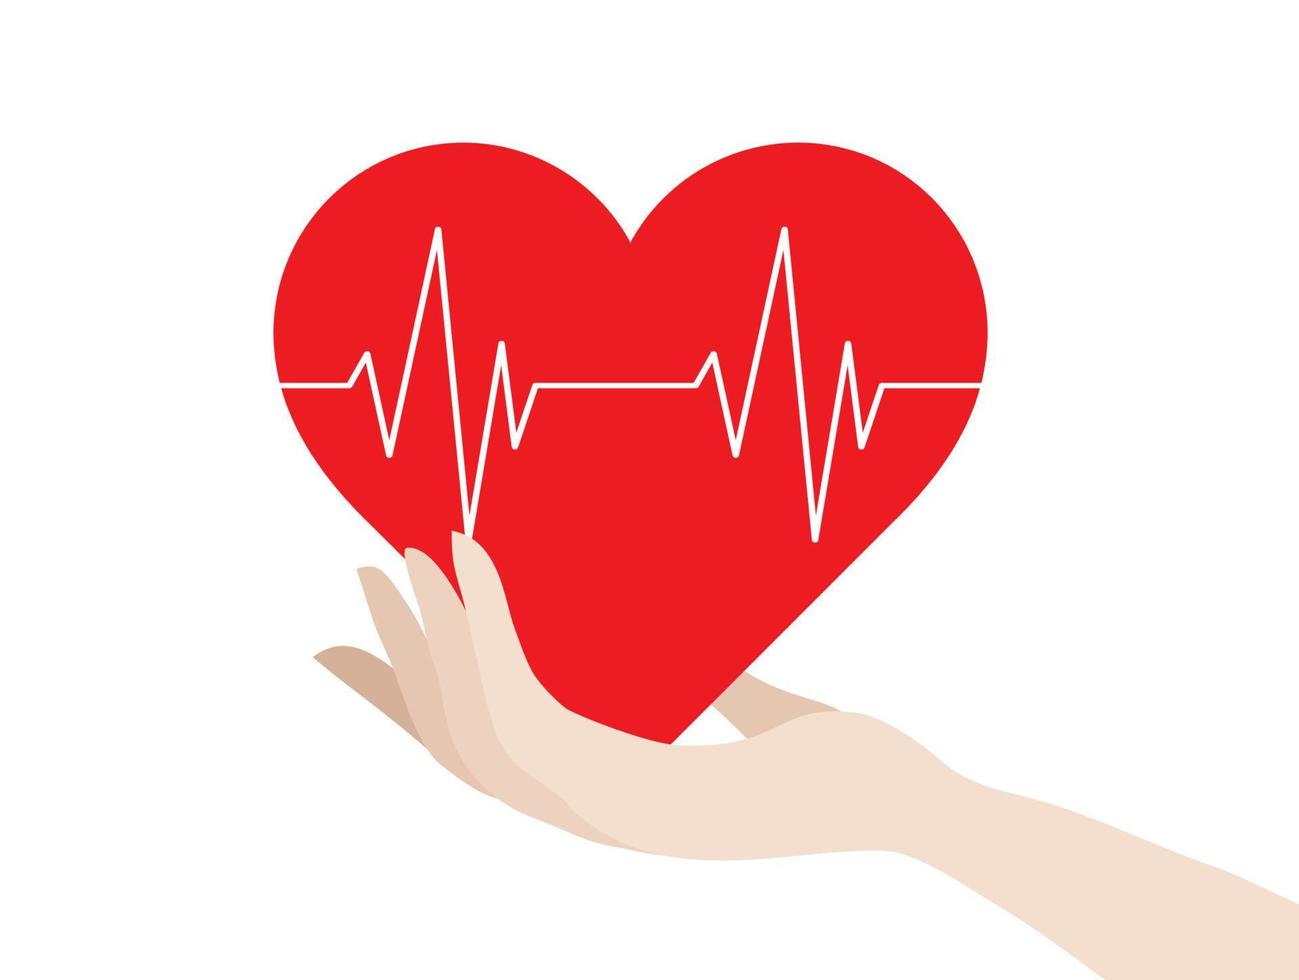 Red heart beat pulse in hand vector illustration. Medical and health design concept background